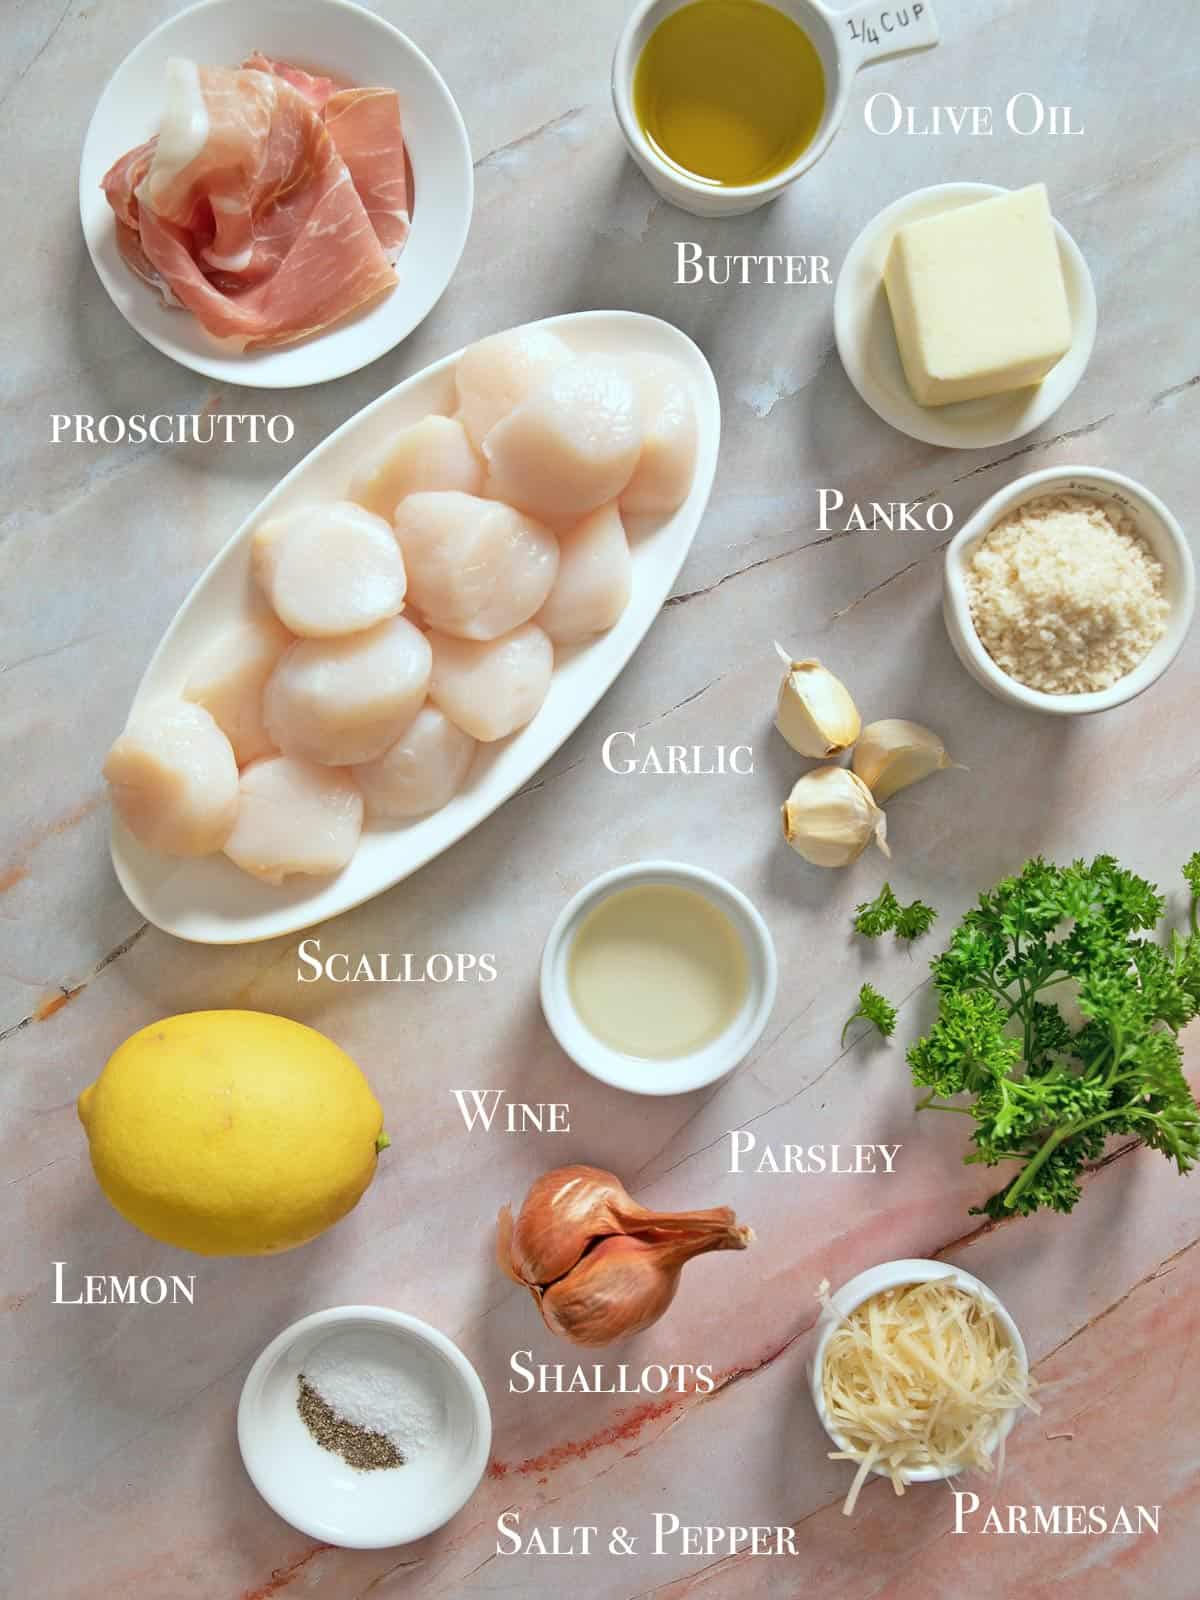 All the ingredients for Ina's Baked Scallops Gratin Recipe With White Wine.